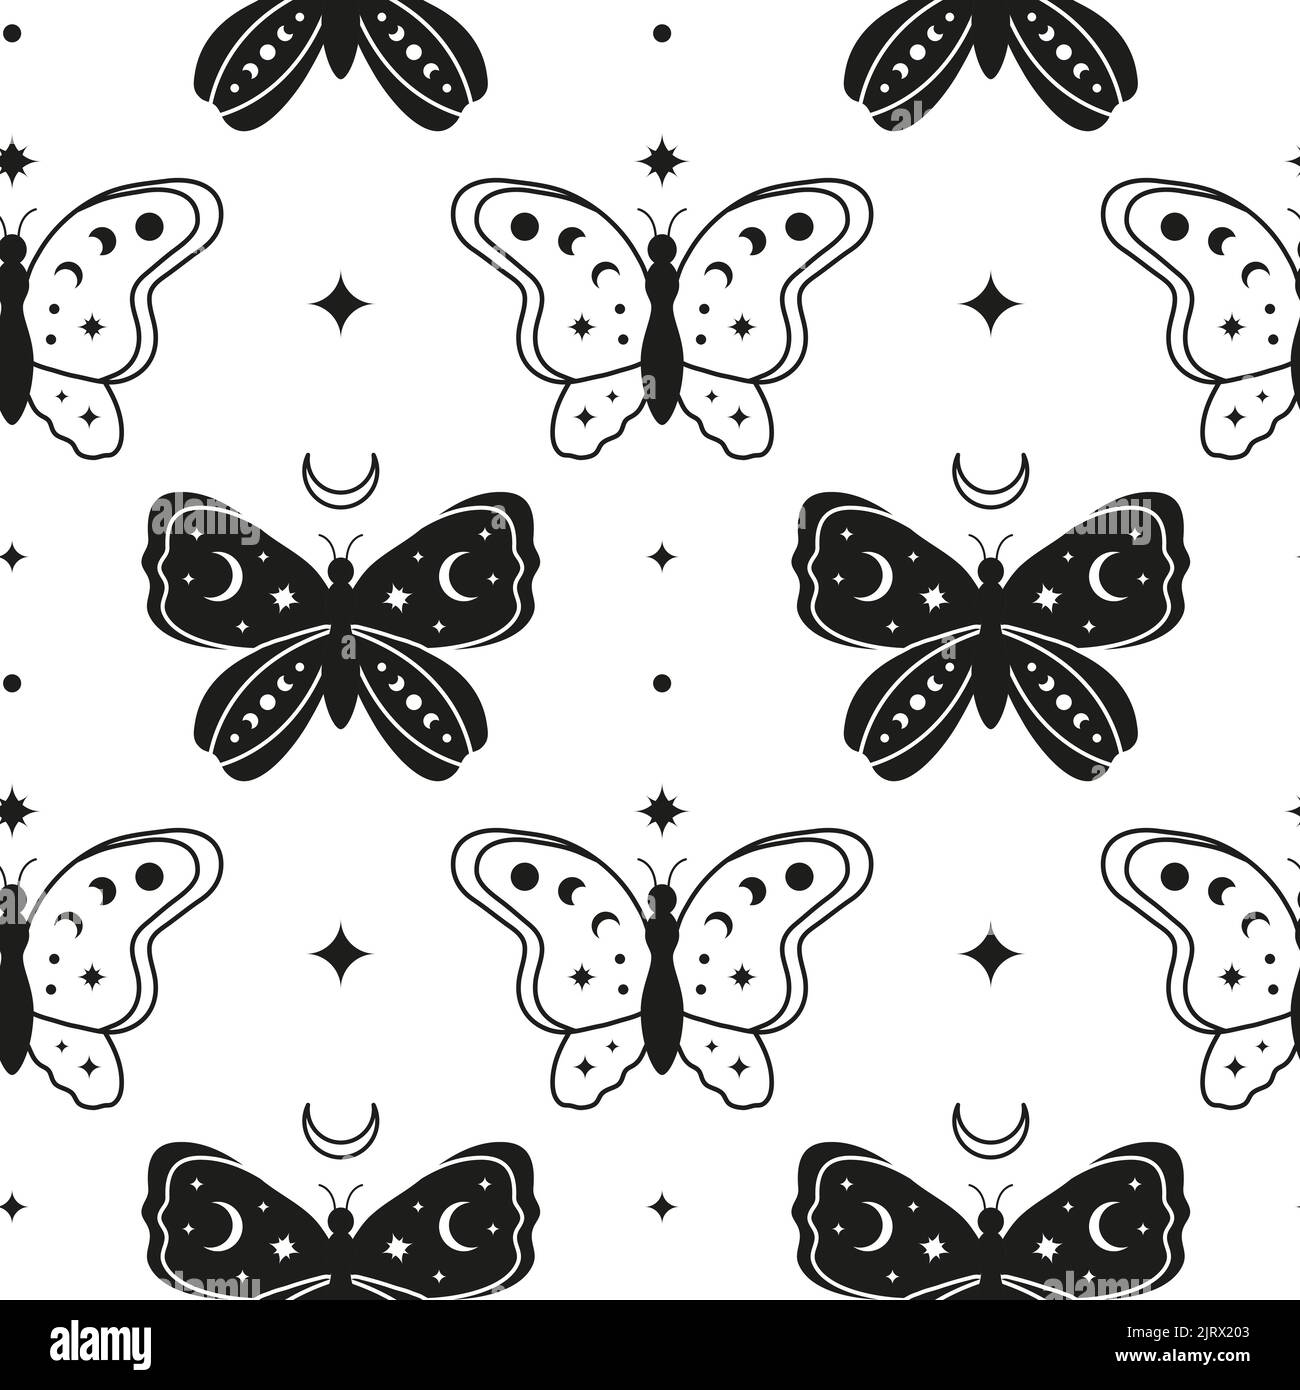 Boho seamless pattern with crescent moon, black and outline butterflies, crescent moon, stars. Bohemian modern background. Celestial wrapping paper. Stock Vector